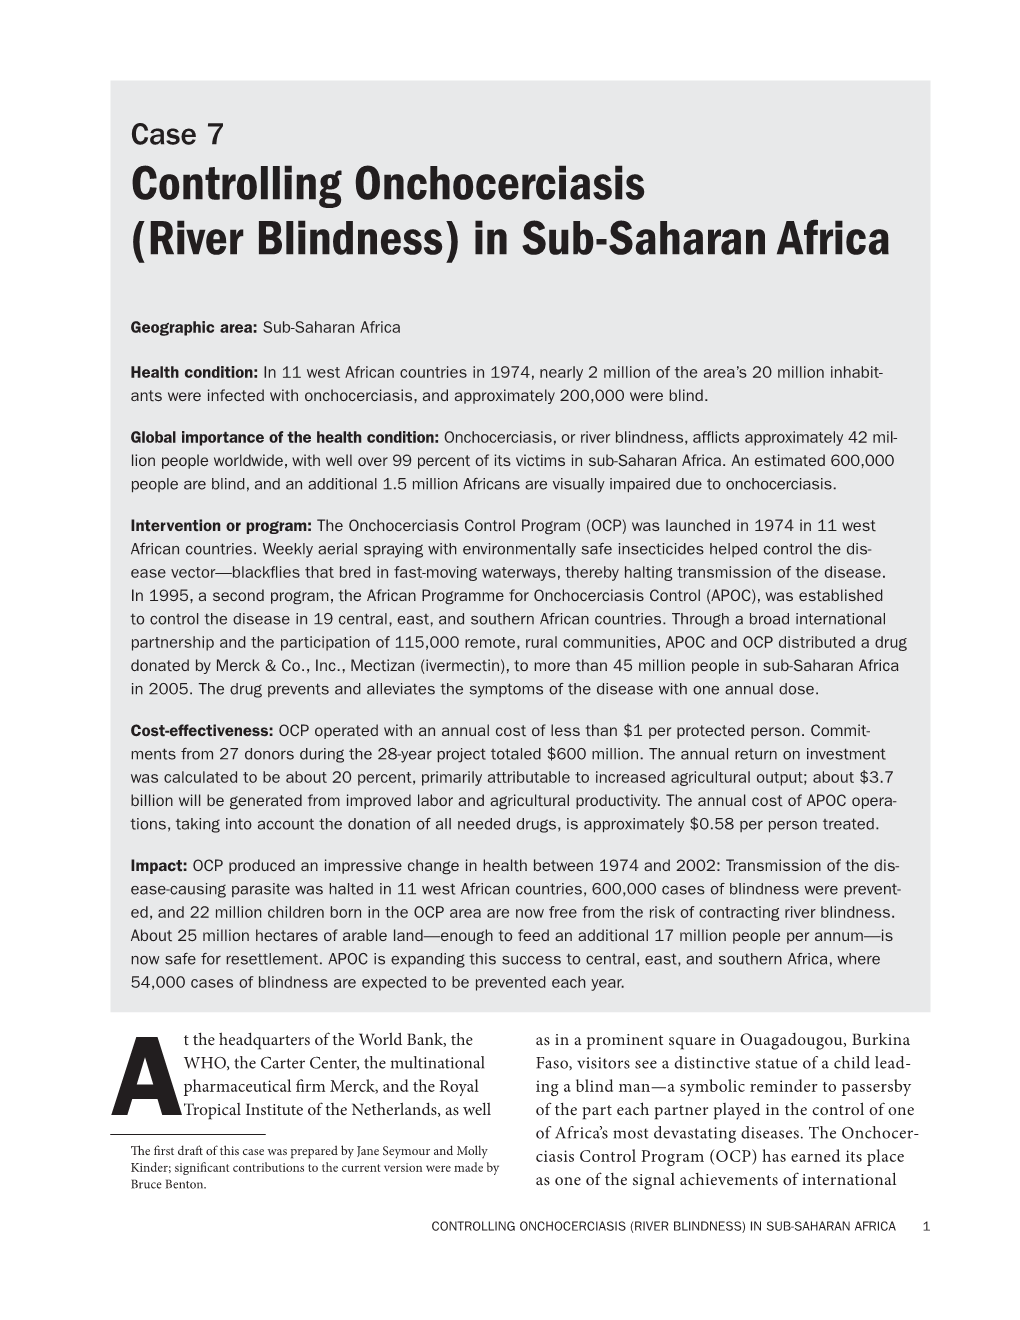 Controlling Onchocerciasis (River Blindness) in Sub-Saharan Africa